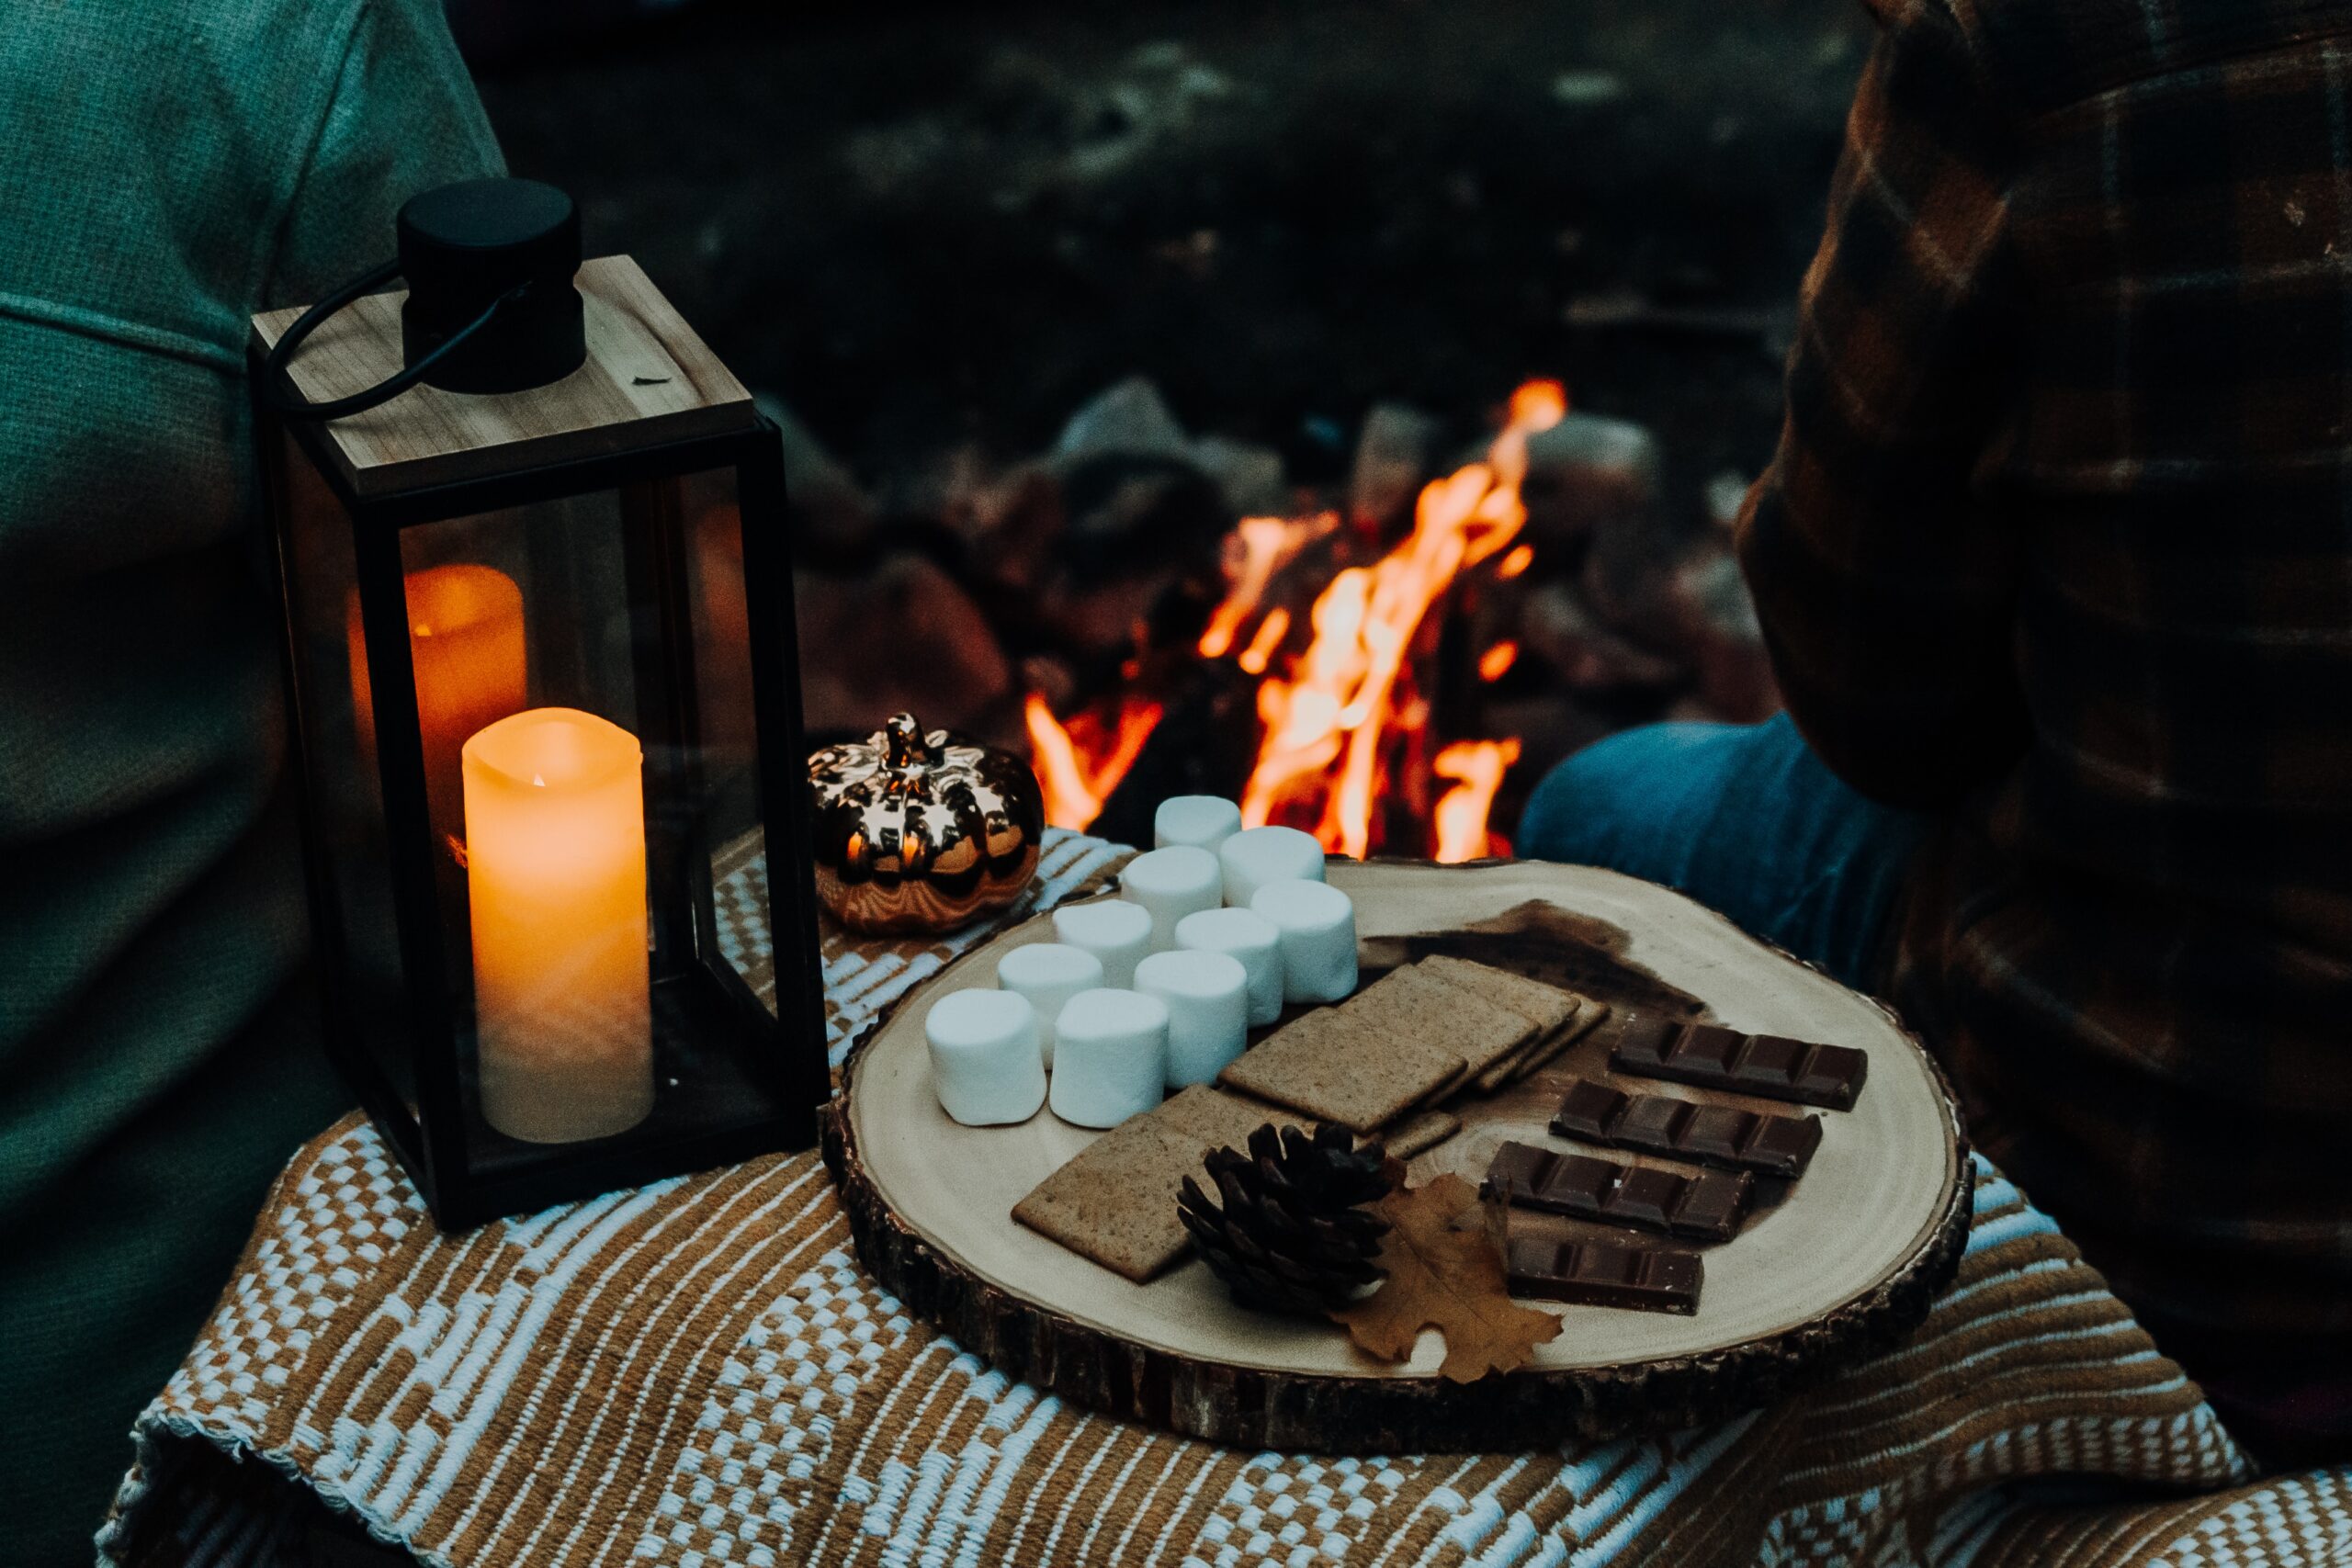 This fire pit seating idea allows you to create a romantic night under the stars. Pictured: A s'mores kit with a fireplace.